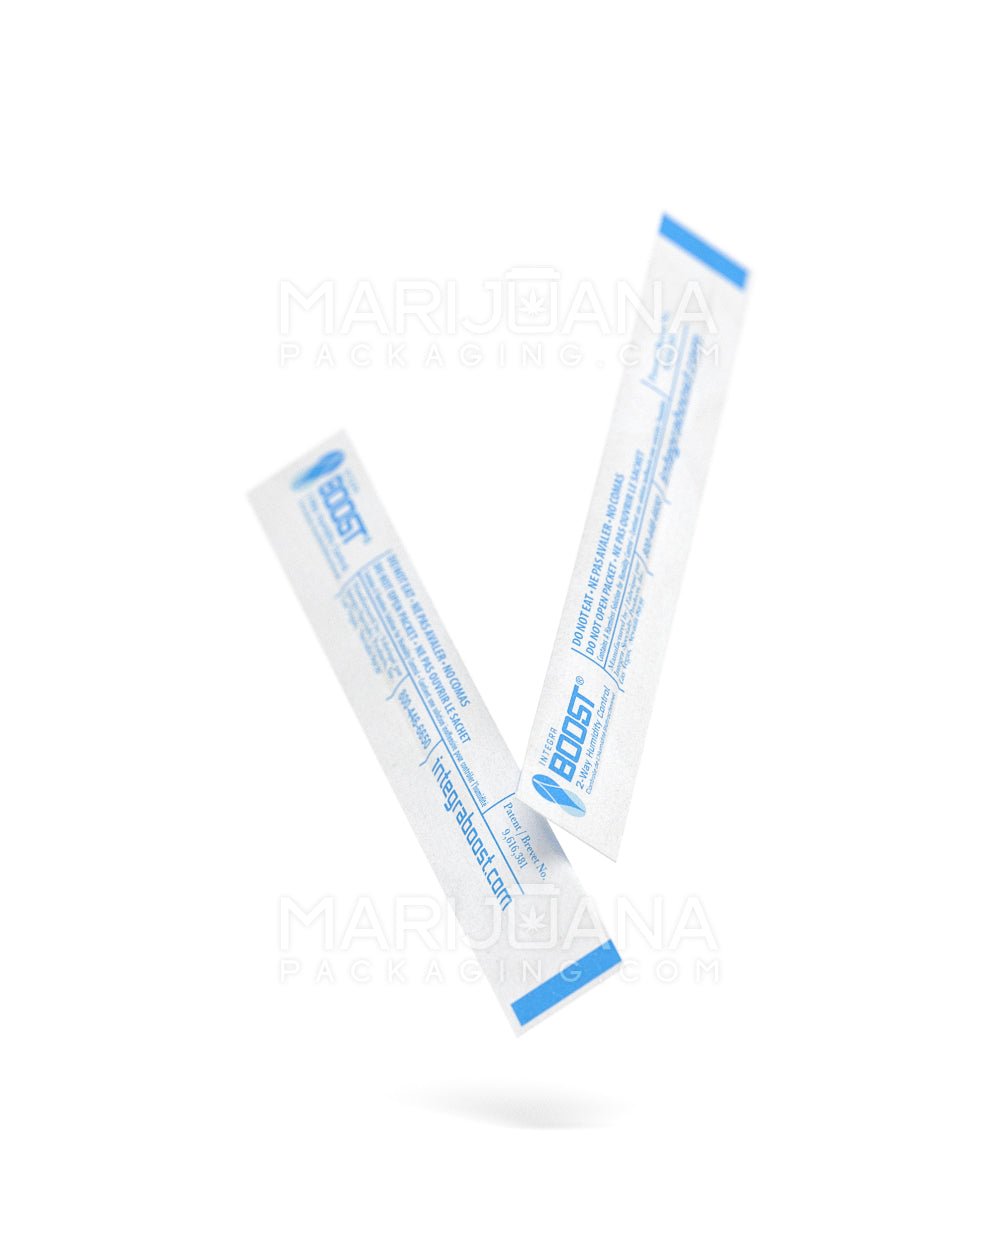 INTEGRA | Boost Pre-Roll Humidity Packs | 80mm - 62% - 100 Count - 4